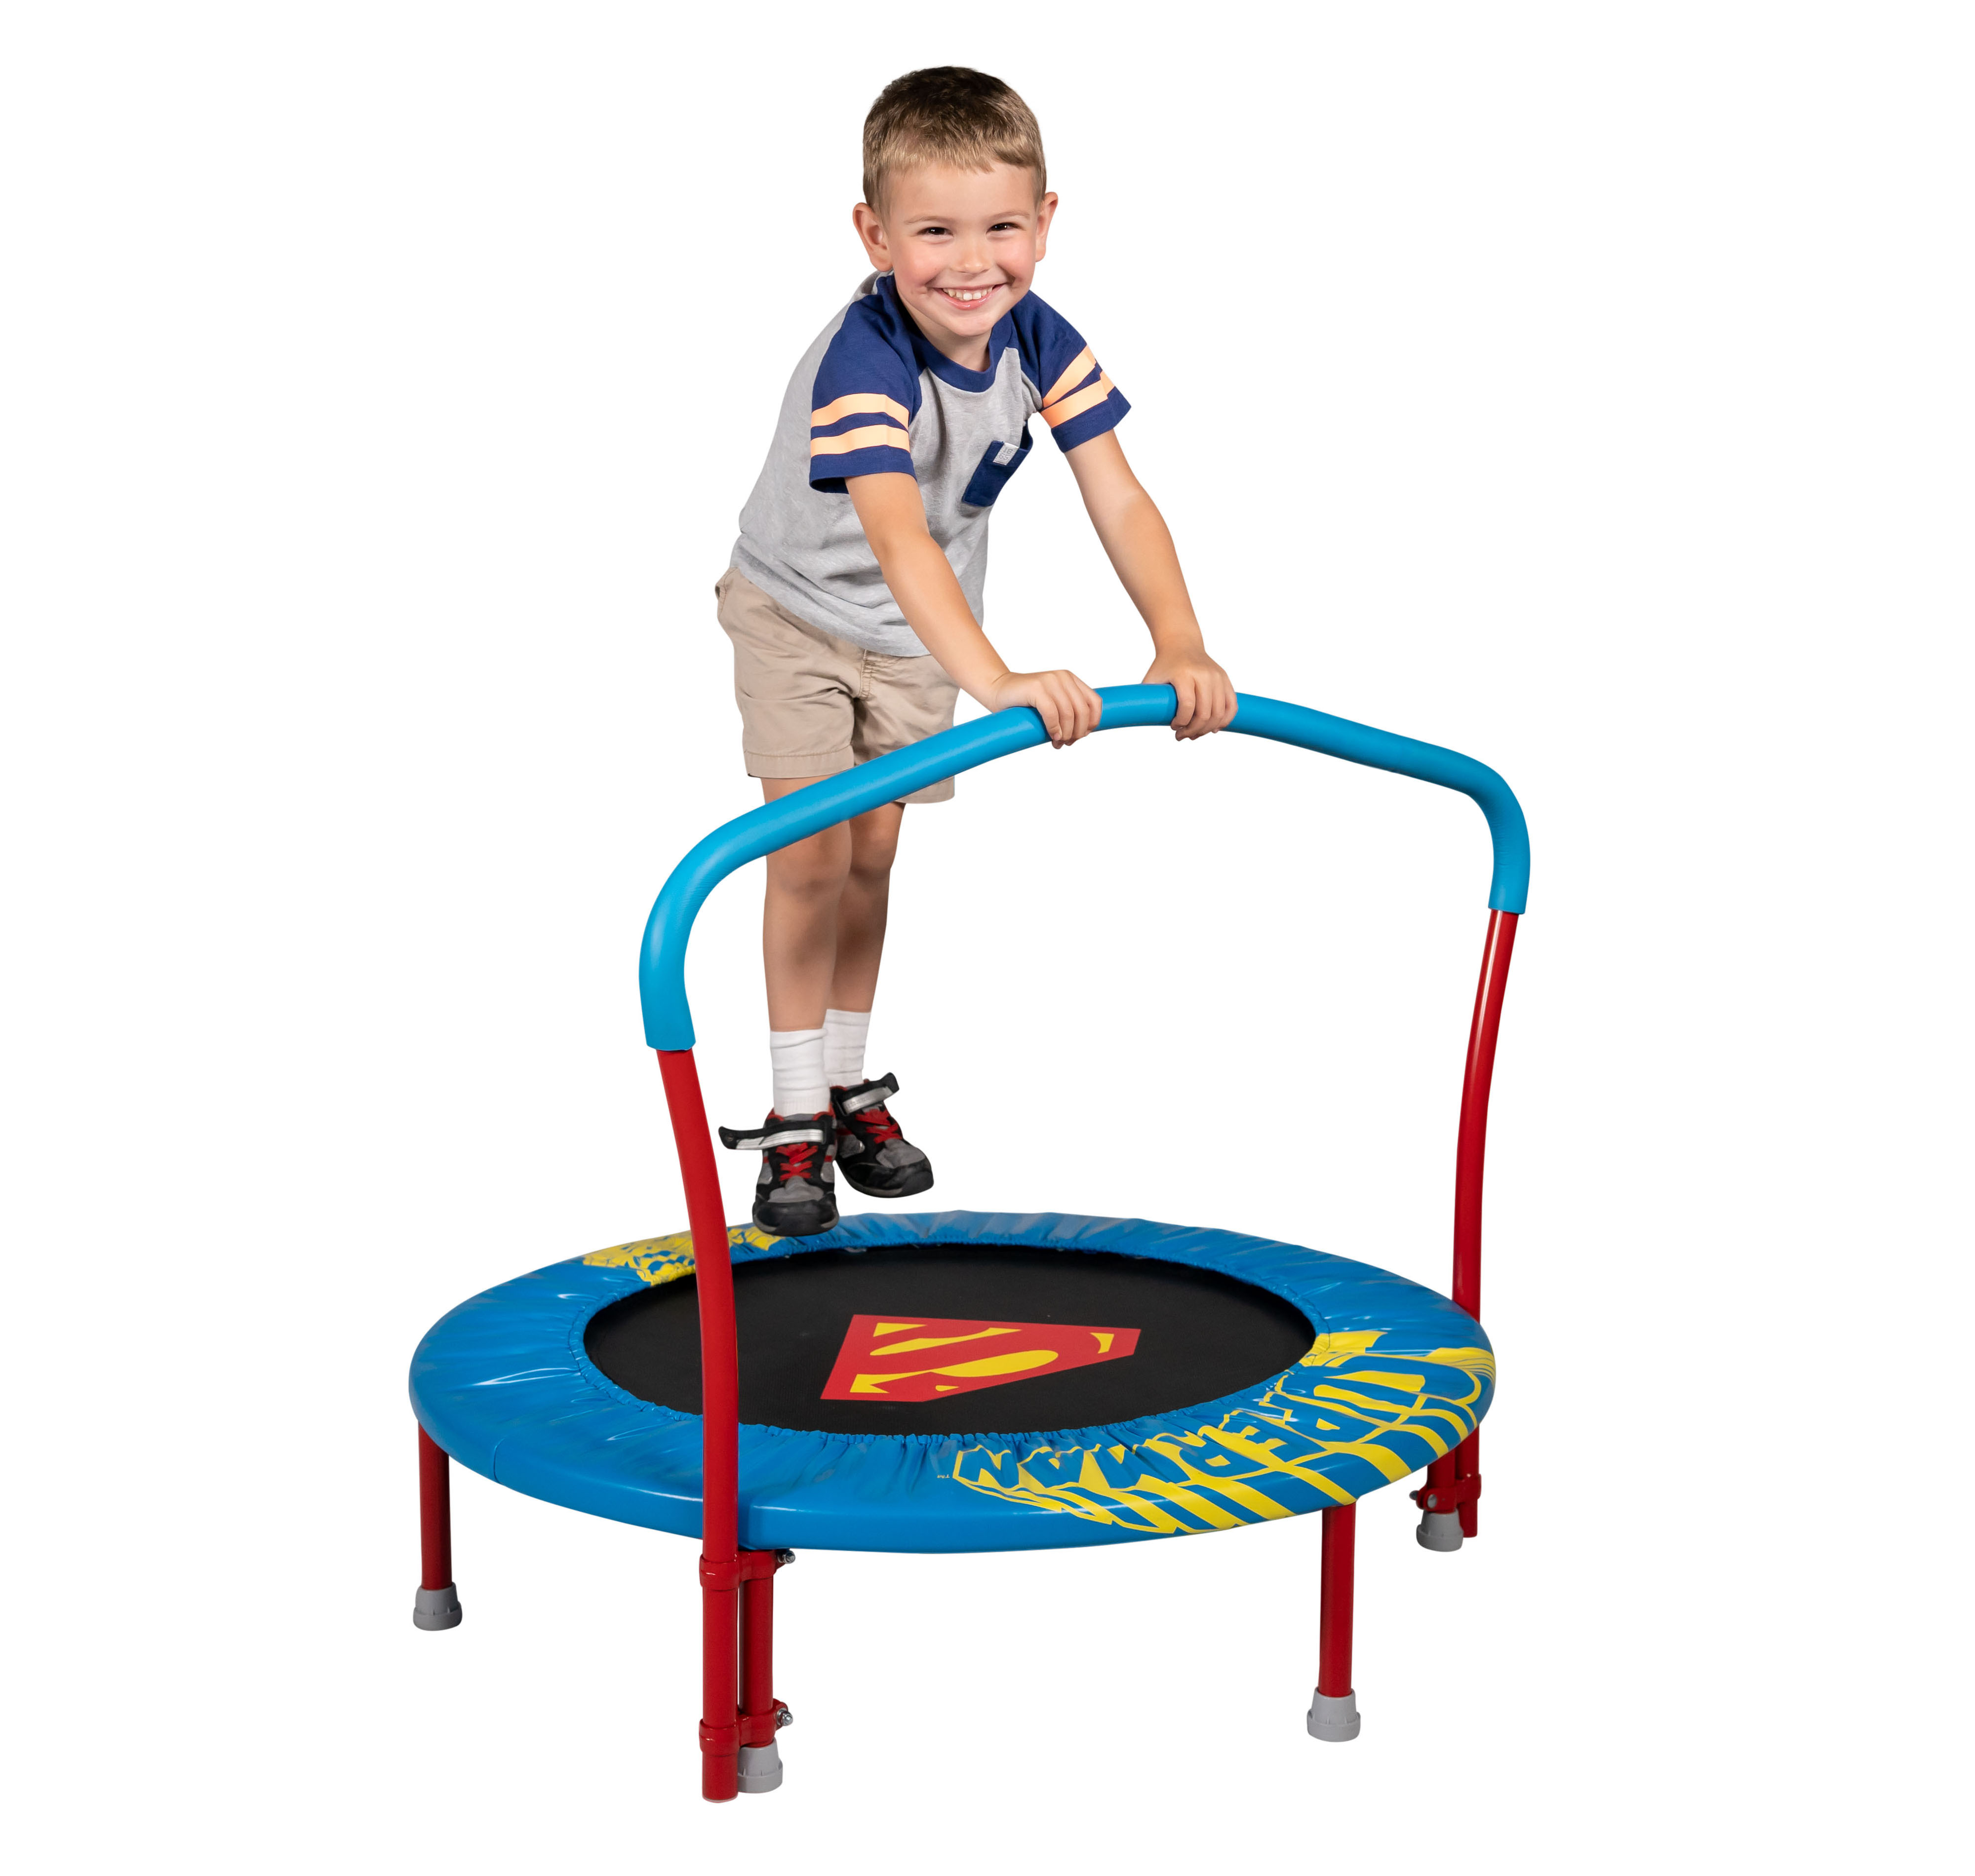 My First Superman 36-Inch Trampoline, with Handlebar - image 4 of 6